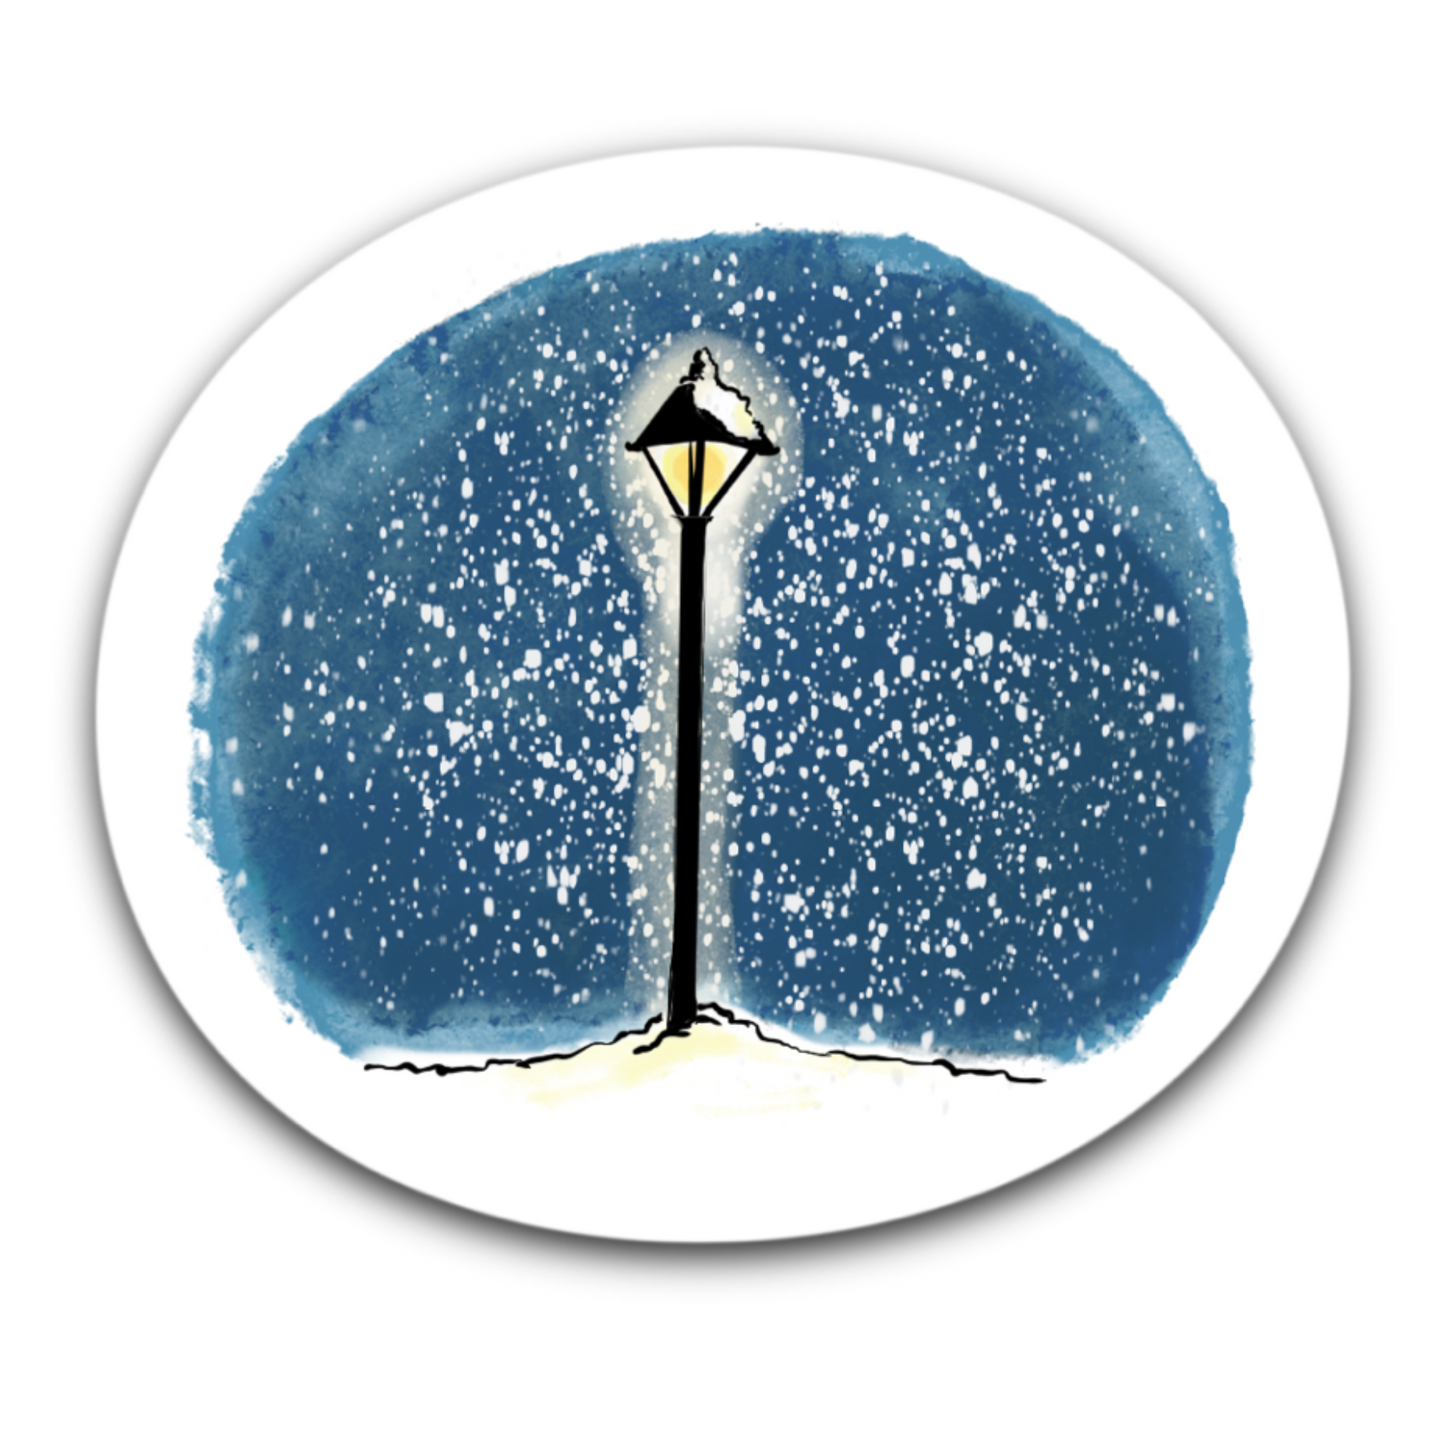 Snowy Lamppost - Narnia Inspired Bubble free sticker H4